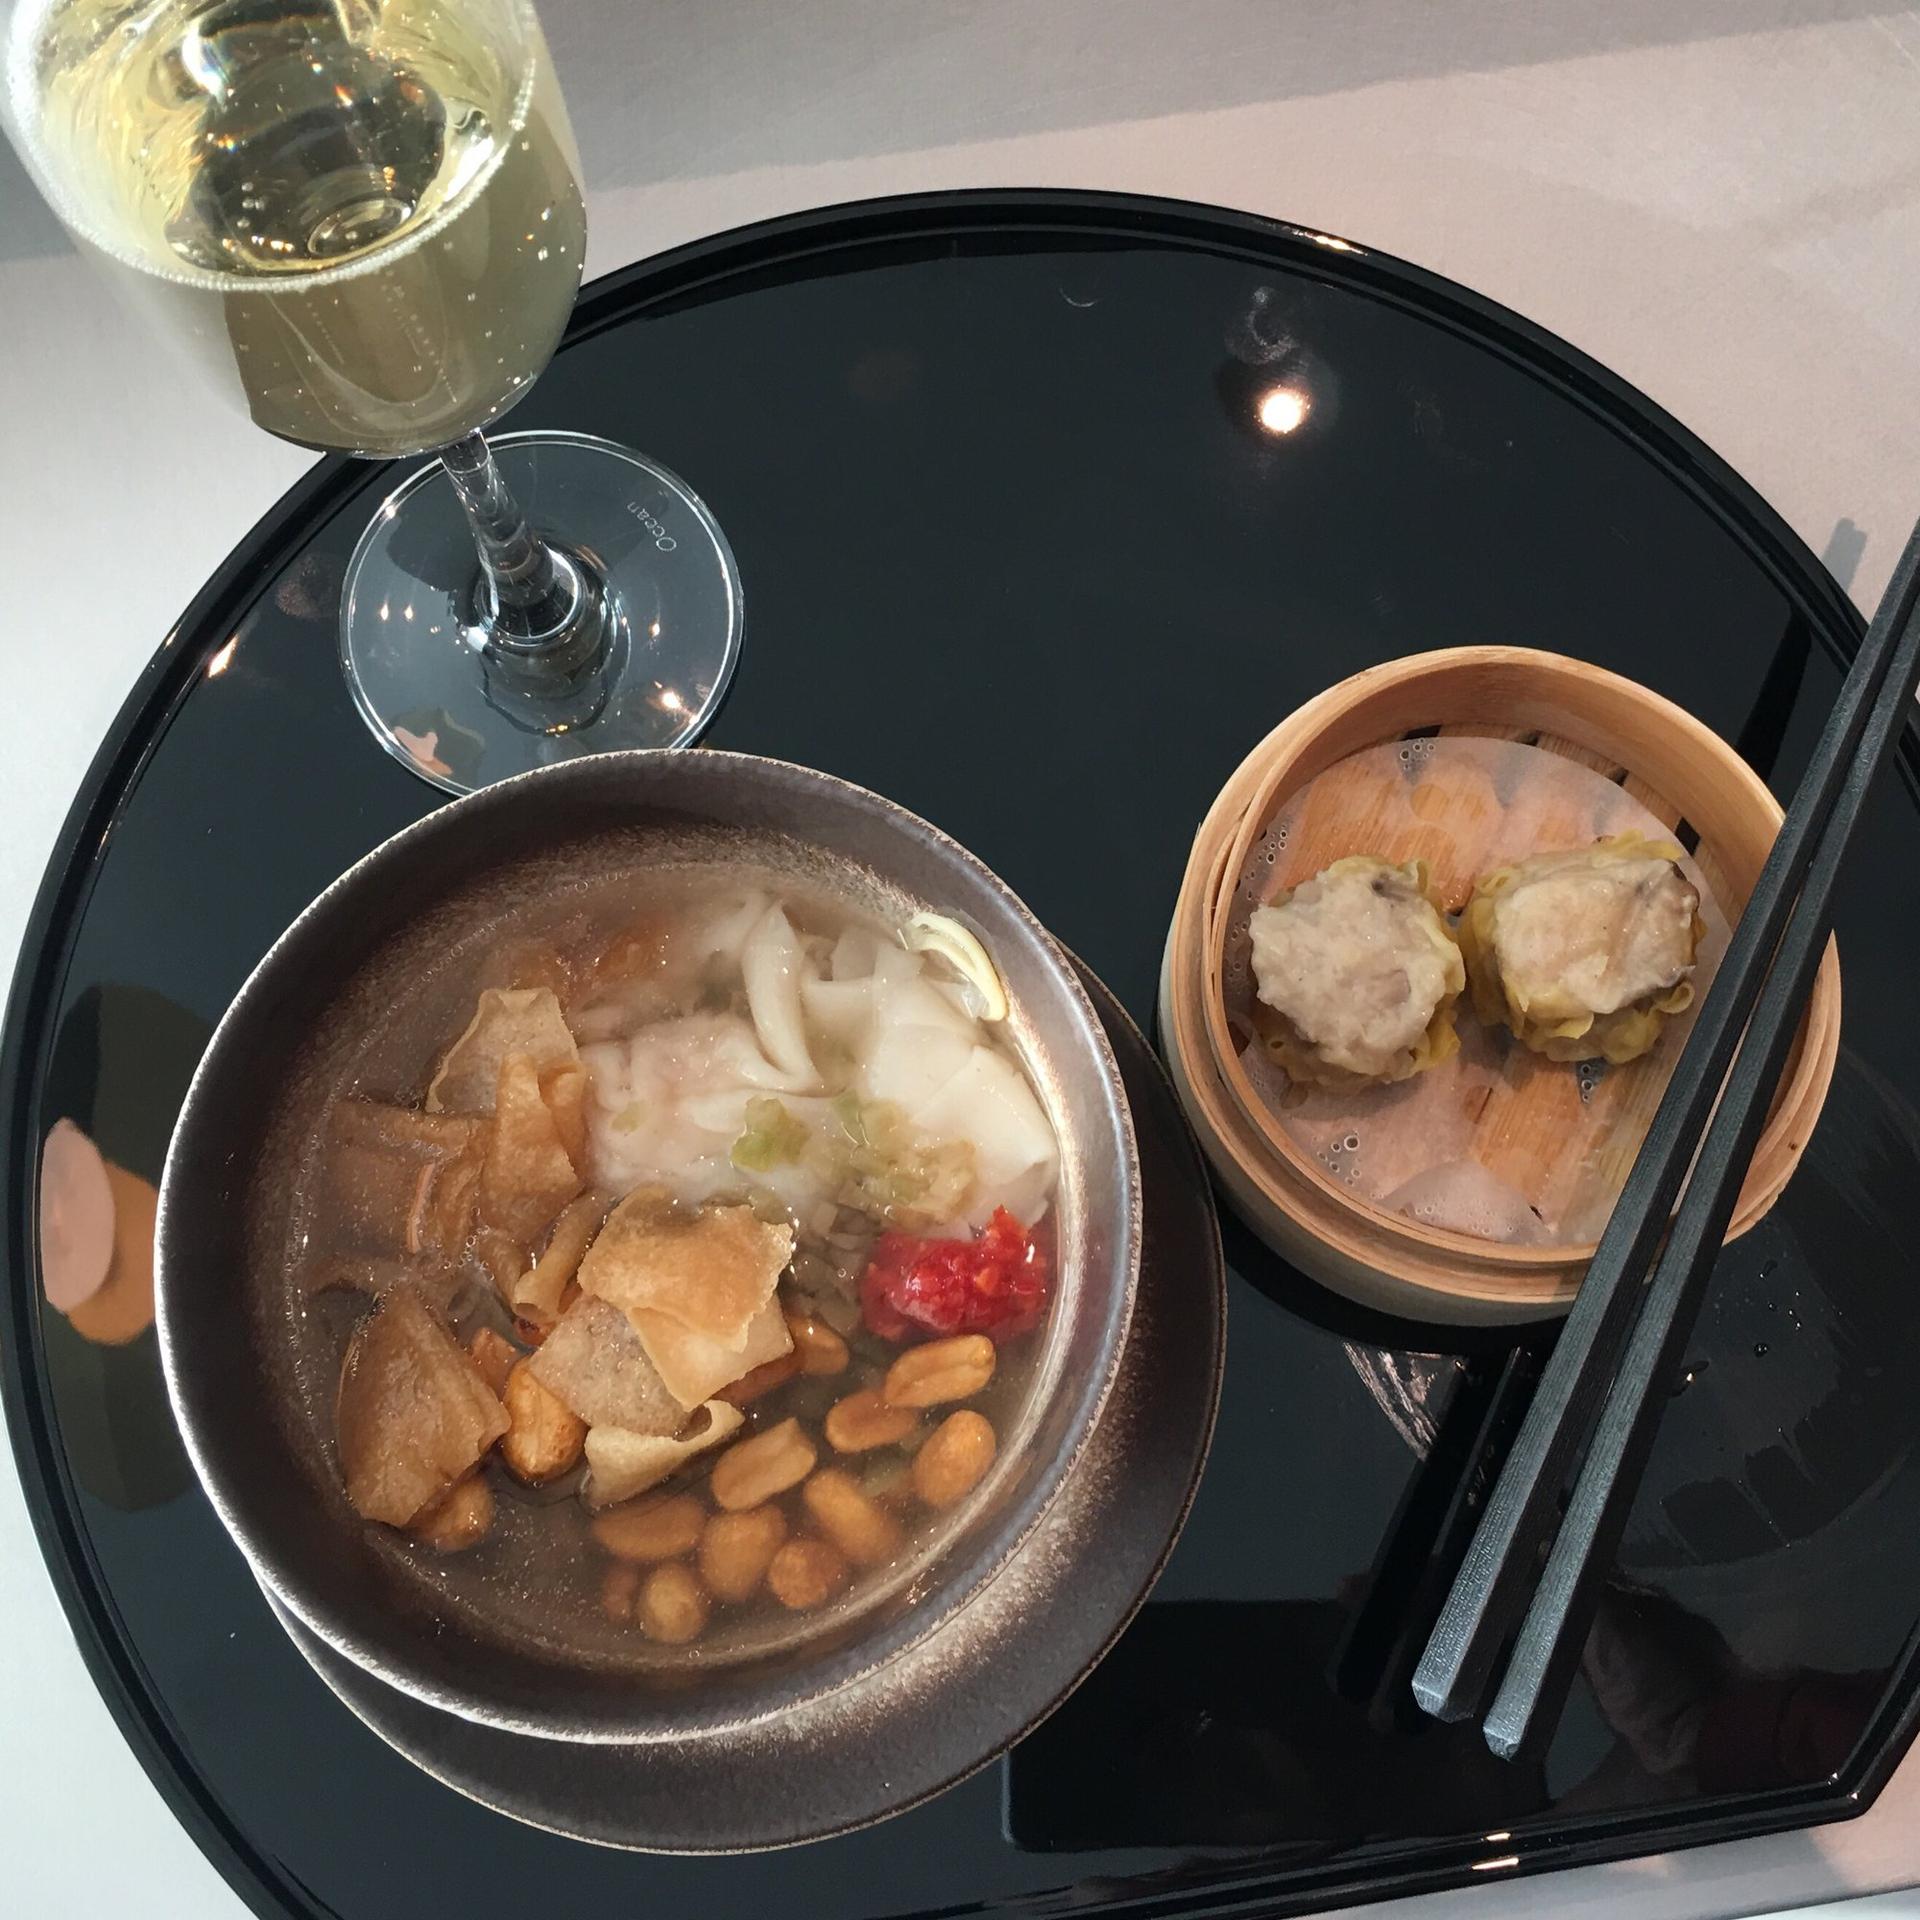 Cathay Pacific First Class Lounge image 15 of 17